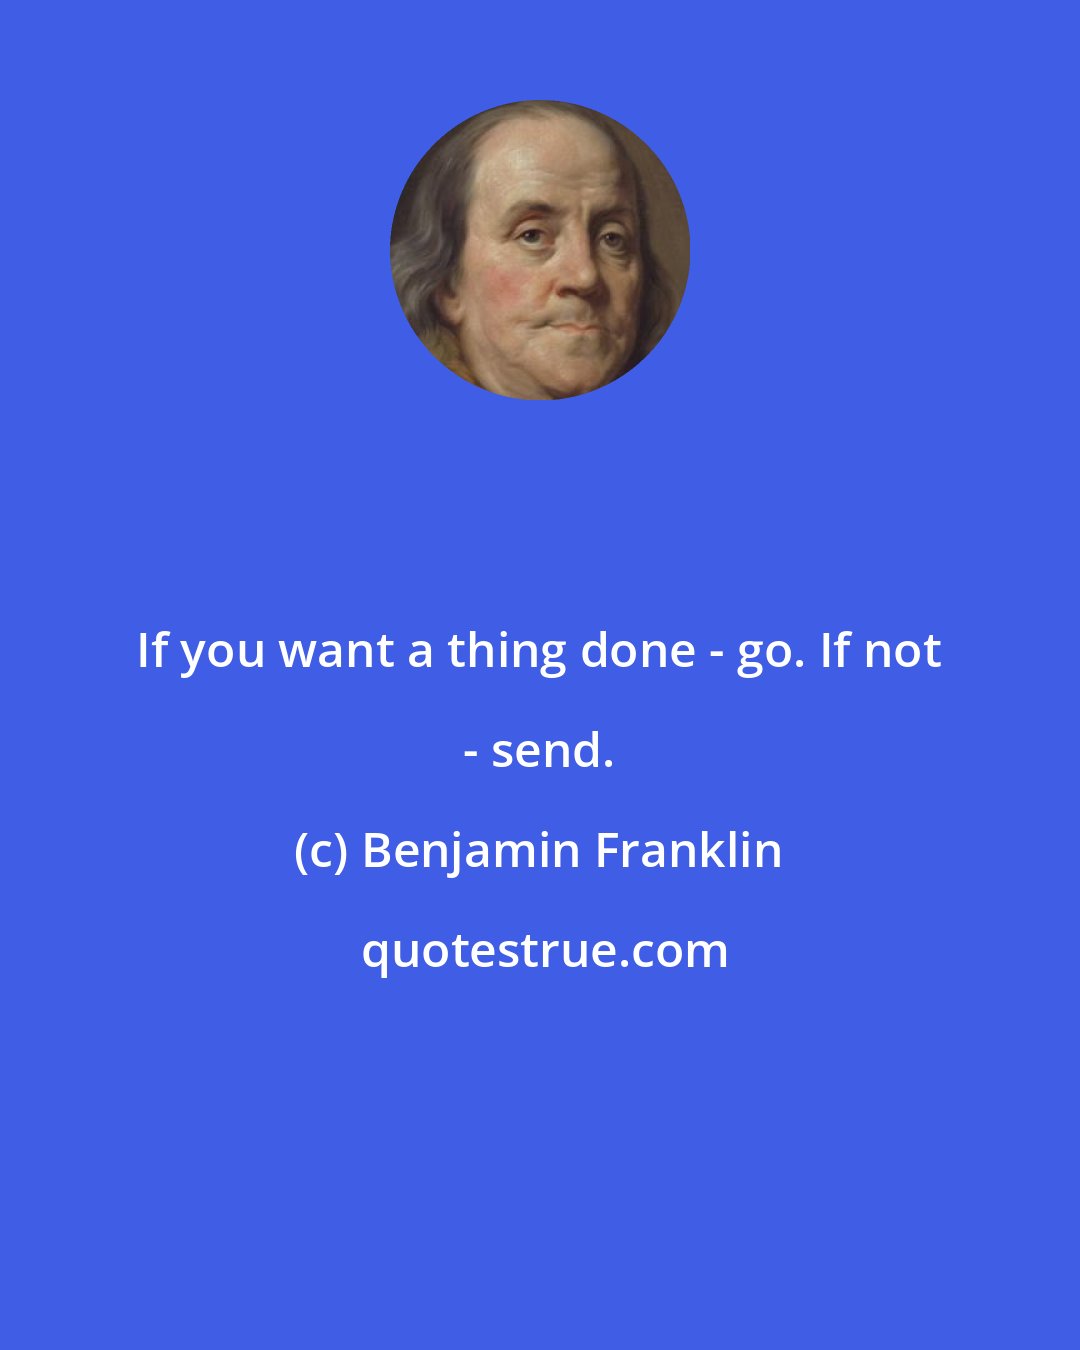 Benjamin Franklin: If you want a thing done - go. If not - send.